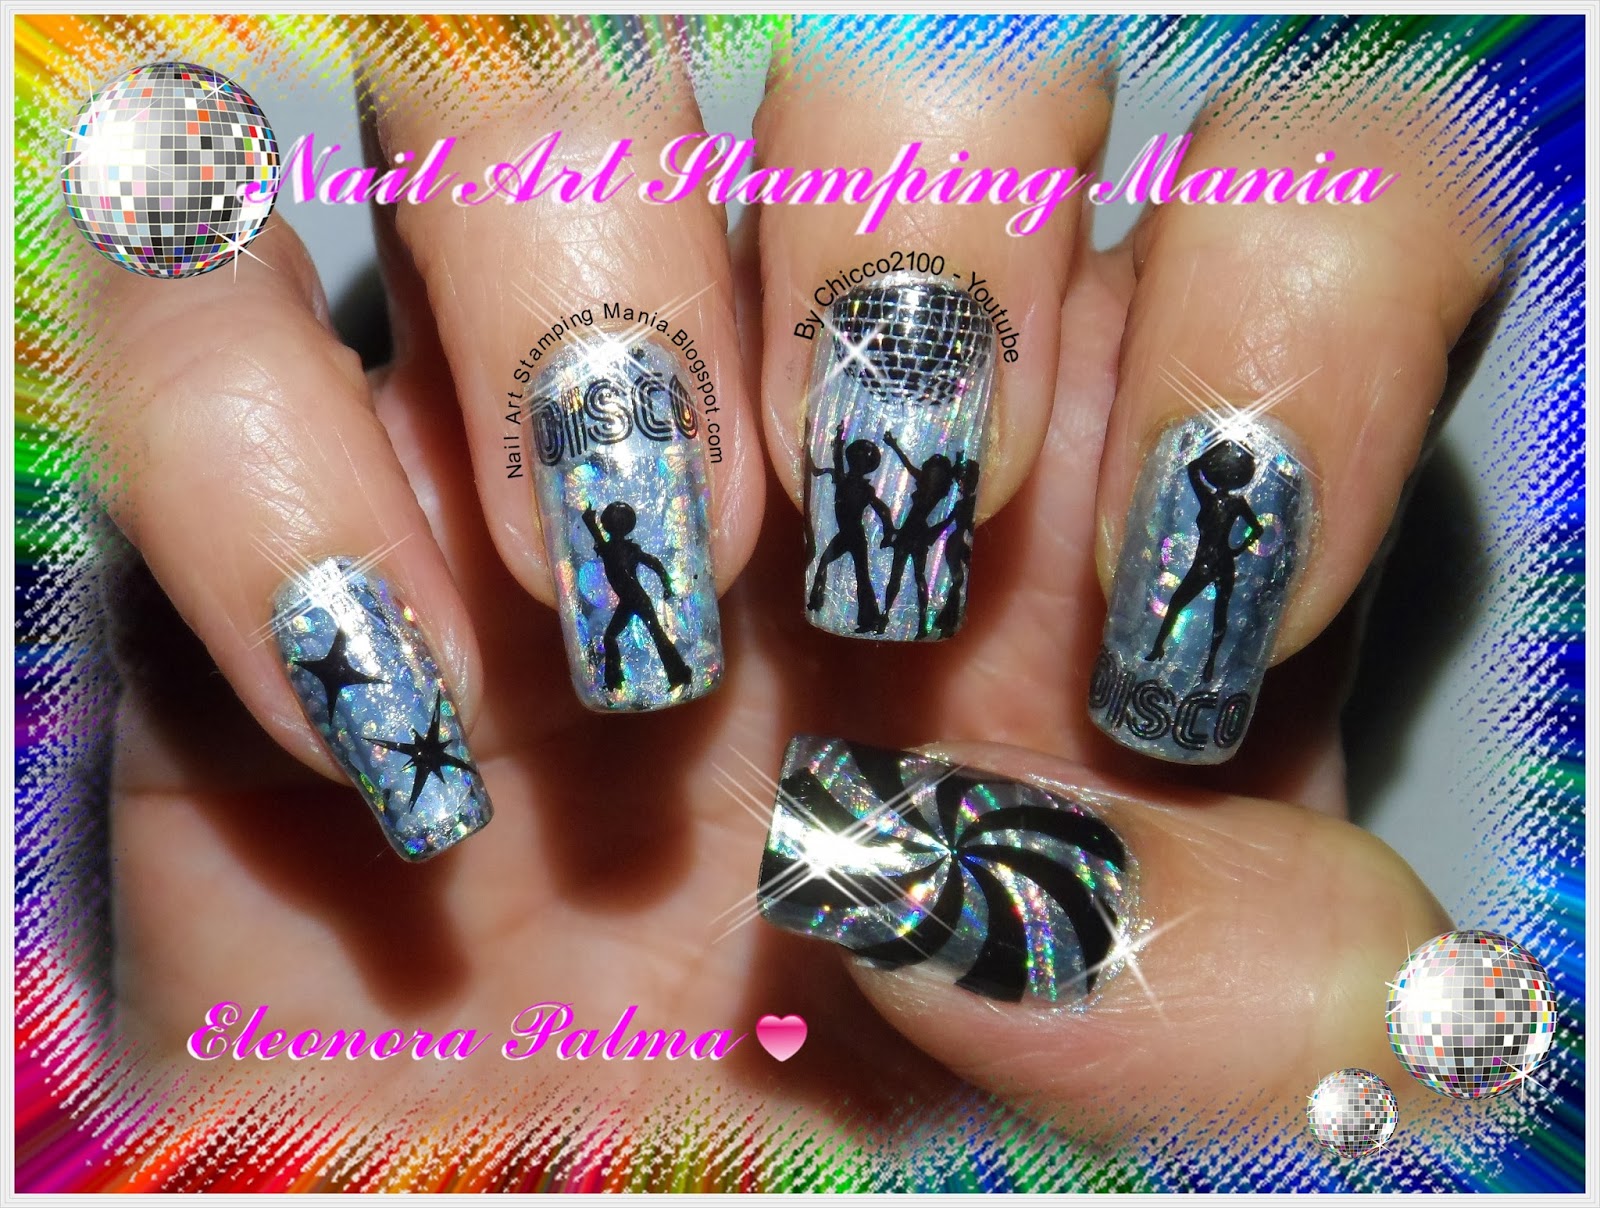 2. Nail Art Stamping Mania Facebook Page - wide 5